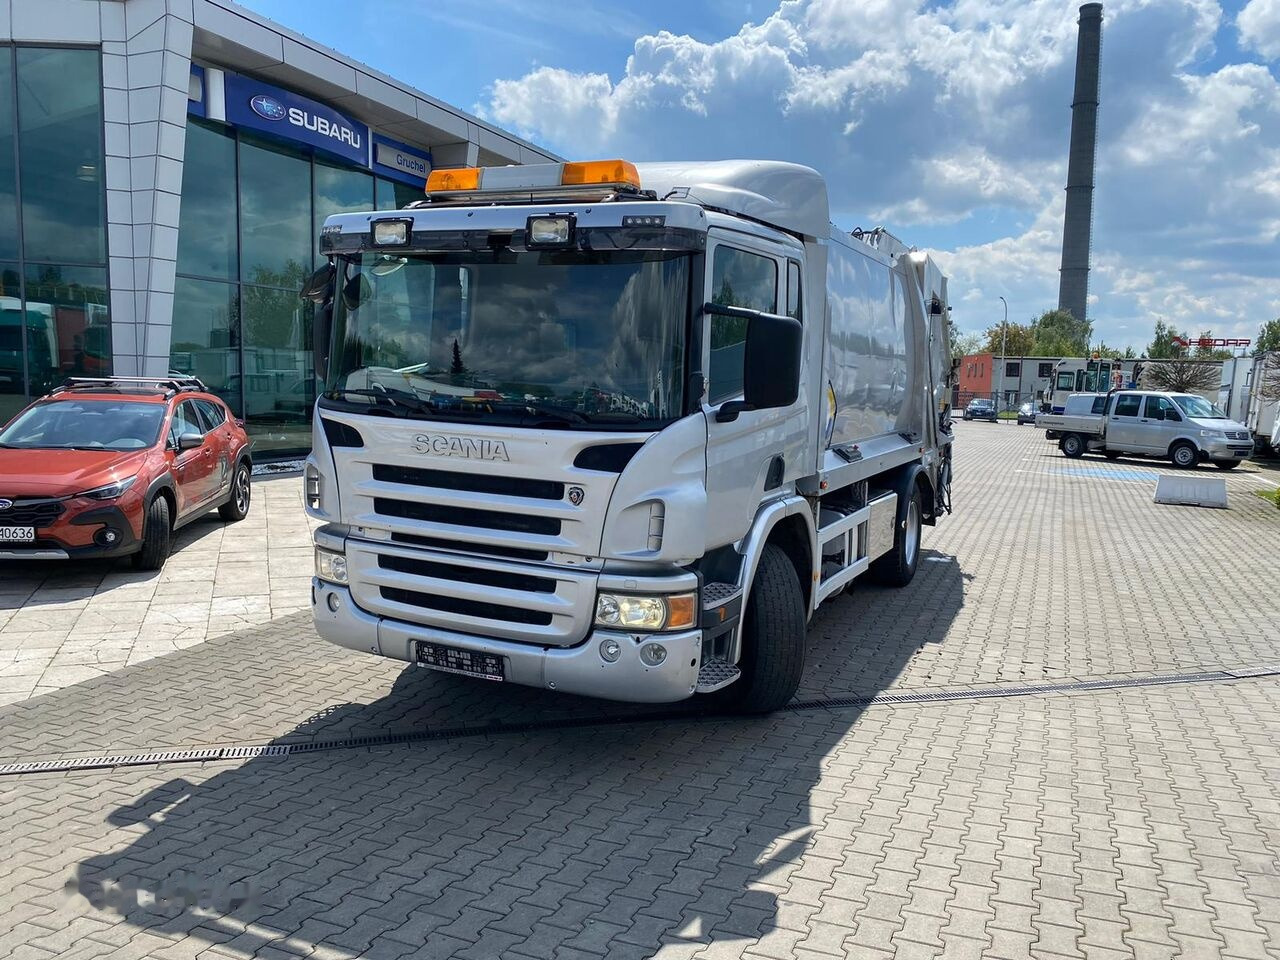 Scania P230DB / JOAB ANACONDA TWIN 13.3m3 / 1 OWNER / FULL SERVICED leasing Scania P230DB / JOAB ANACONDA TWIN 13.3m3 / 1 OWNER / FULL SERVICED: picture 2